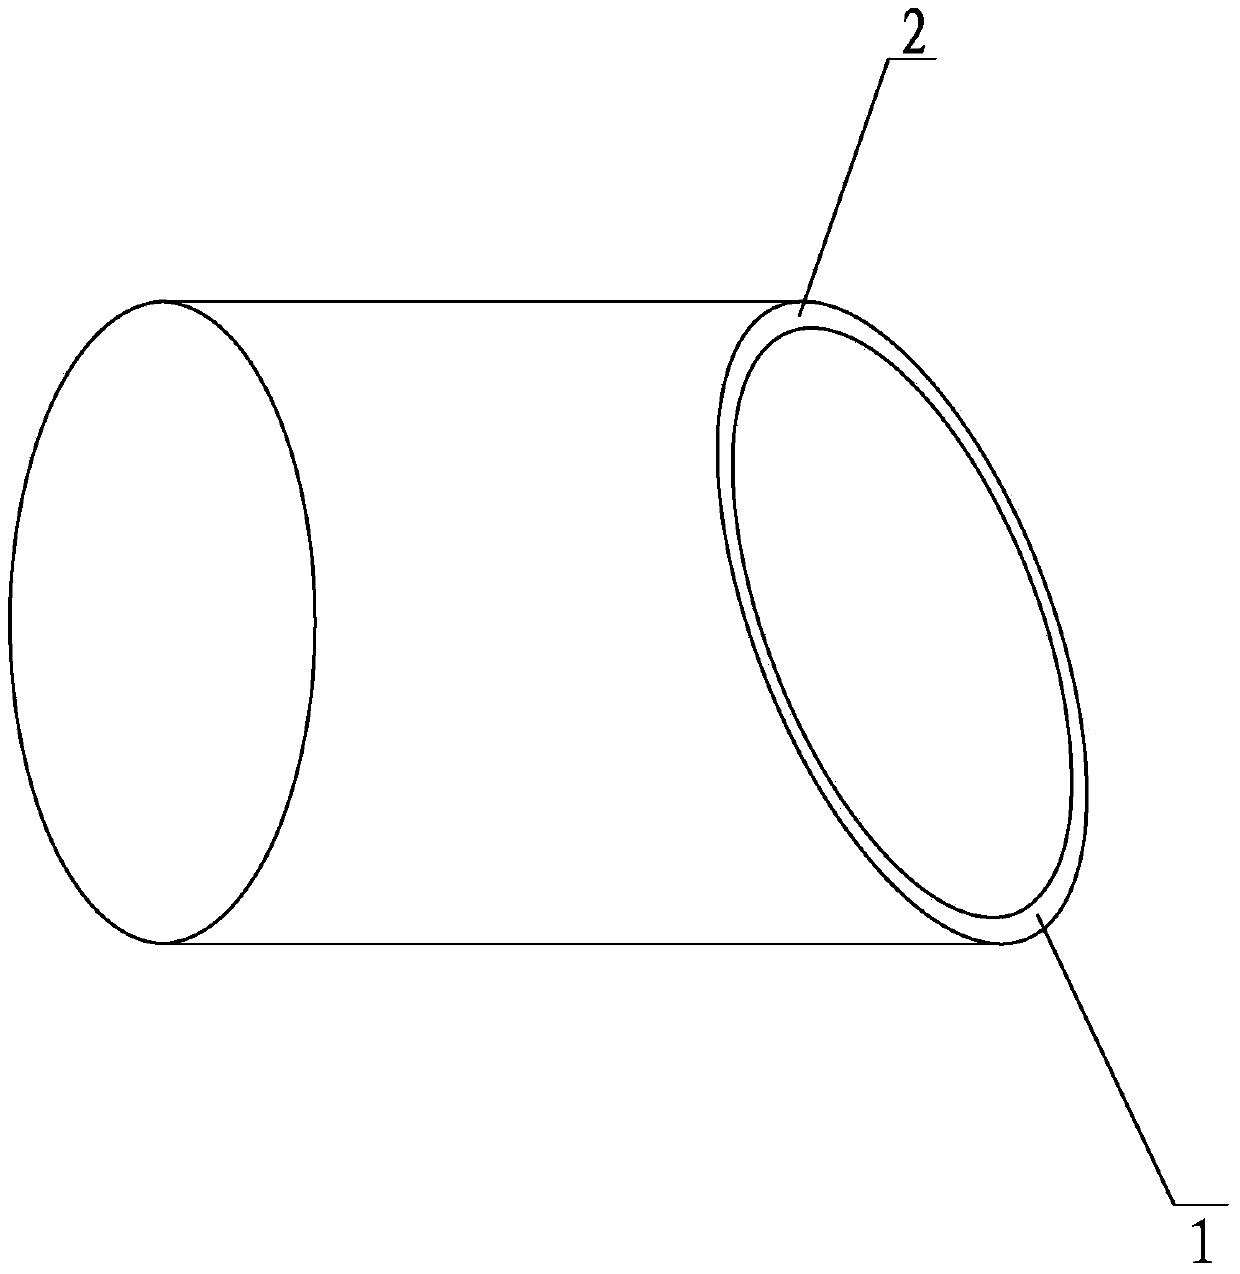 Method for assembling and locating intersecting round pipe